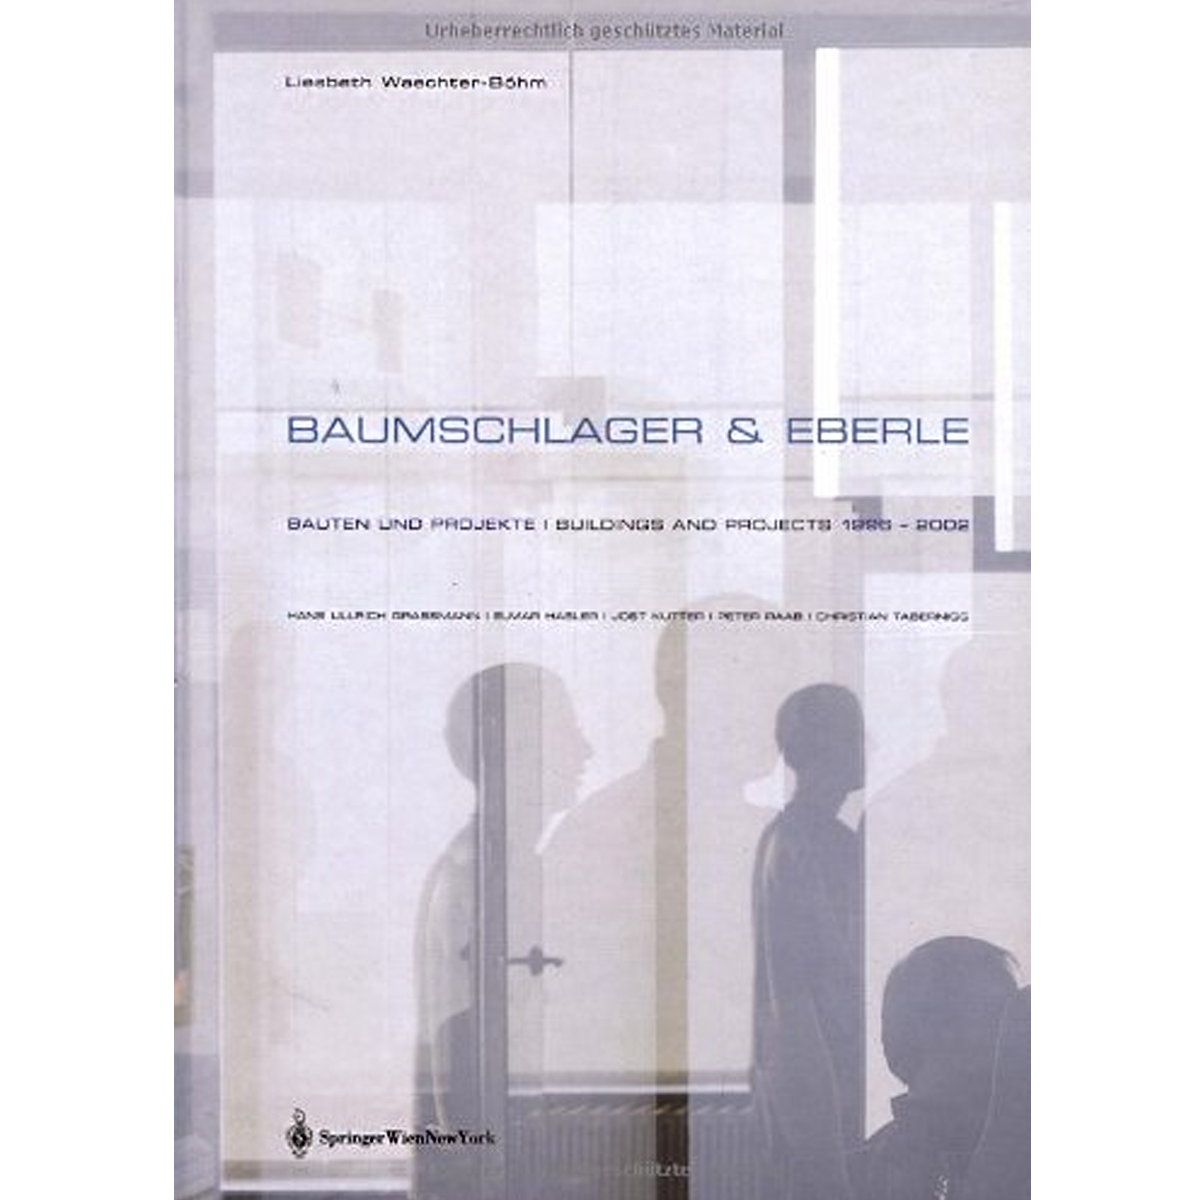 Baumschlager & Eberle: Buildings and Projects 1996-2002